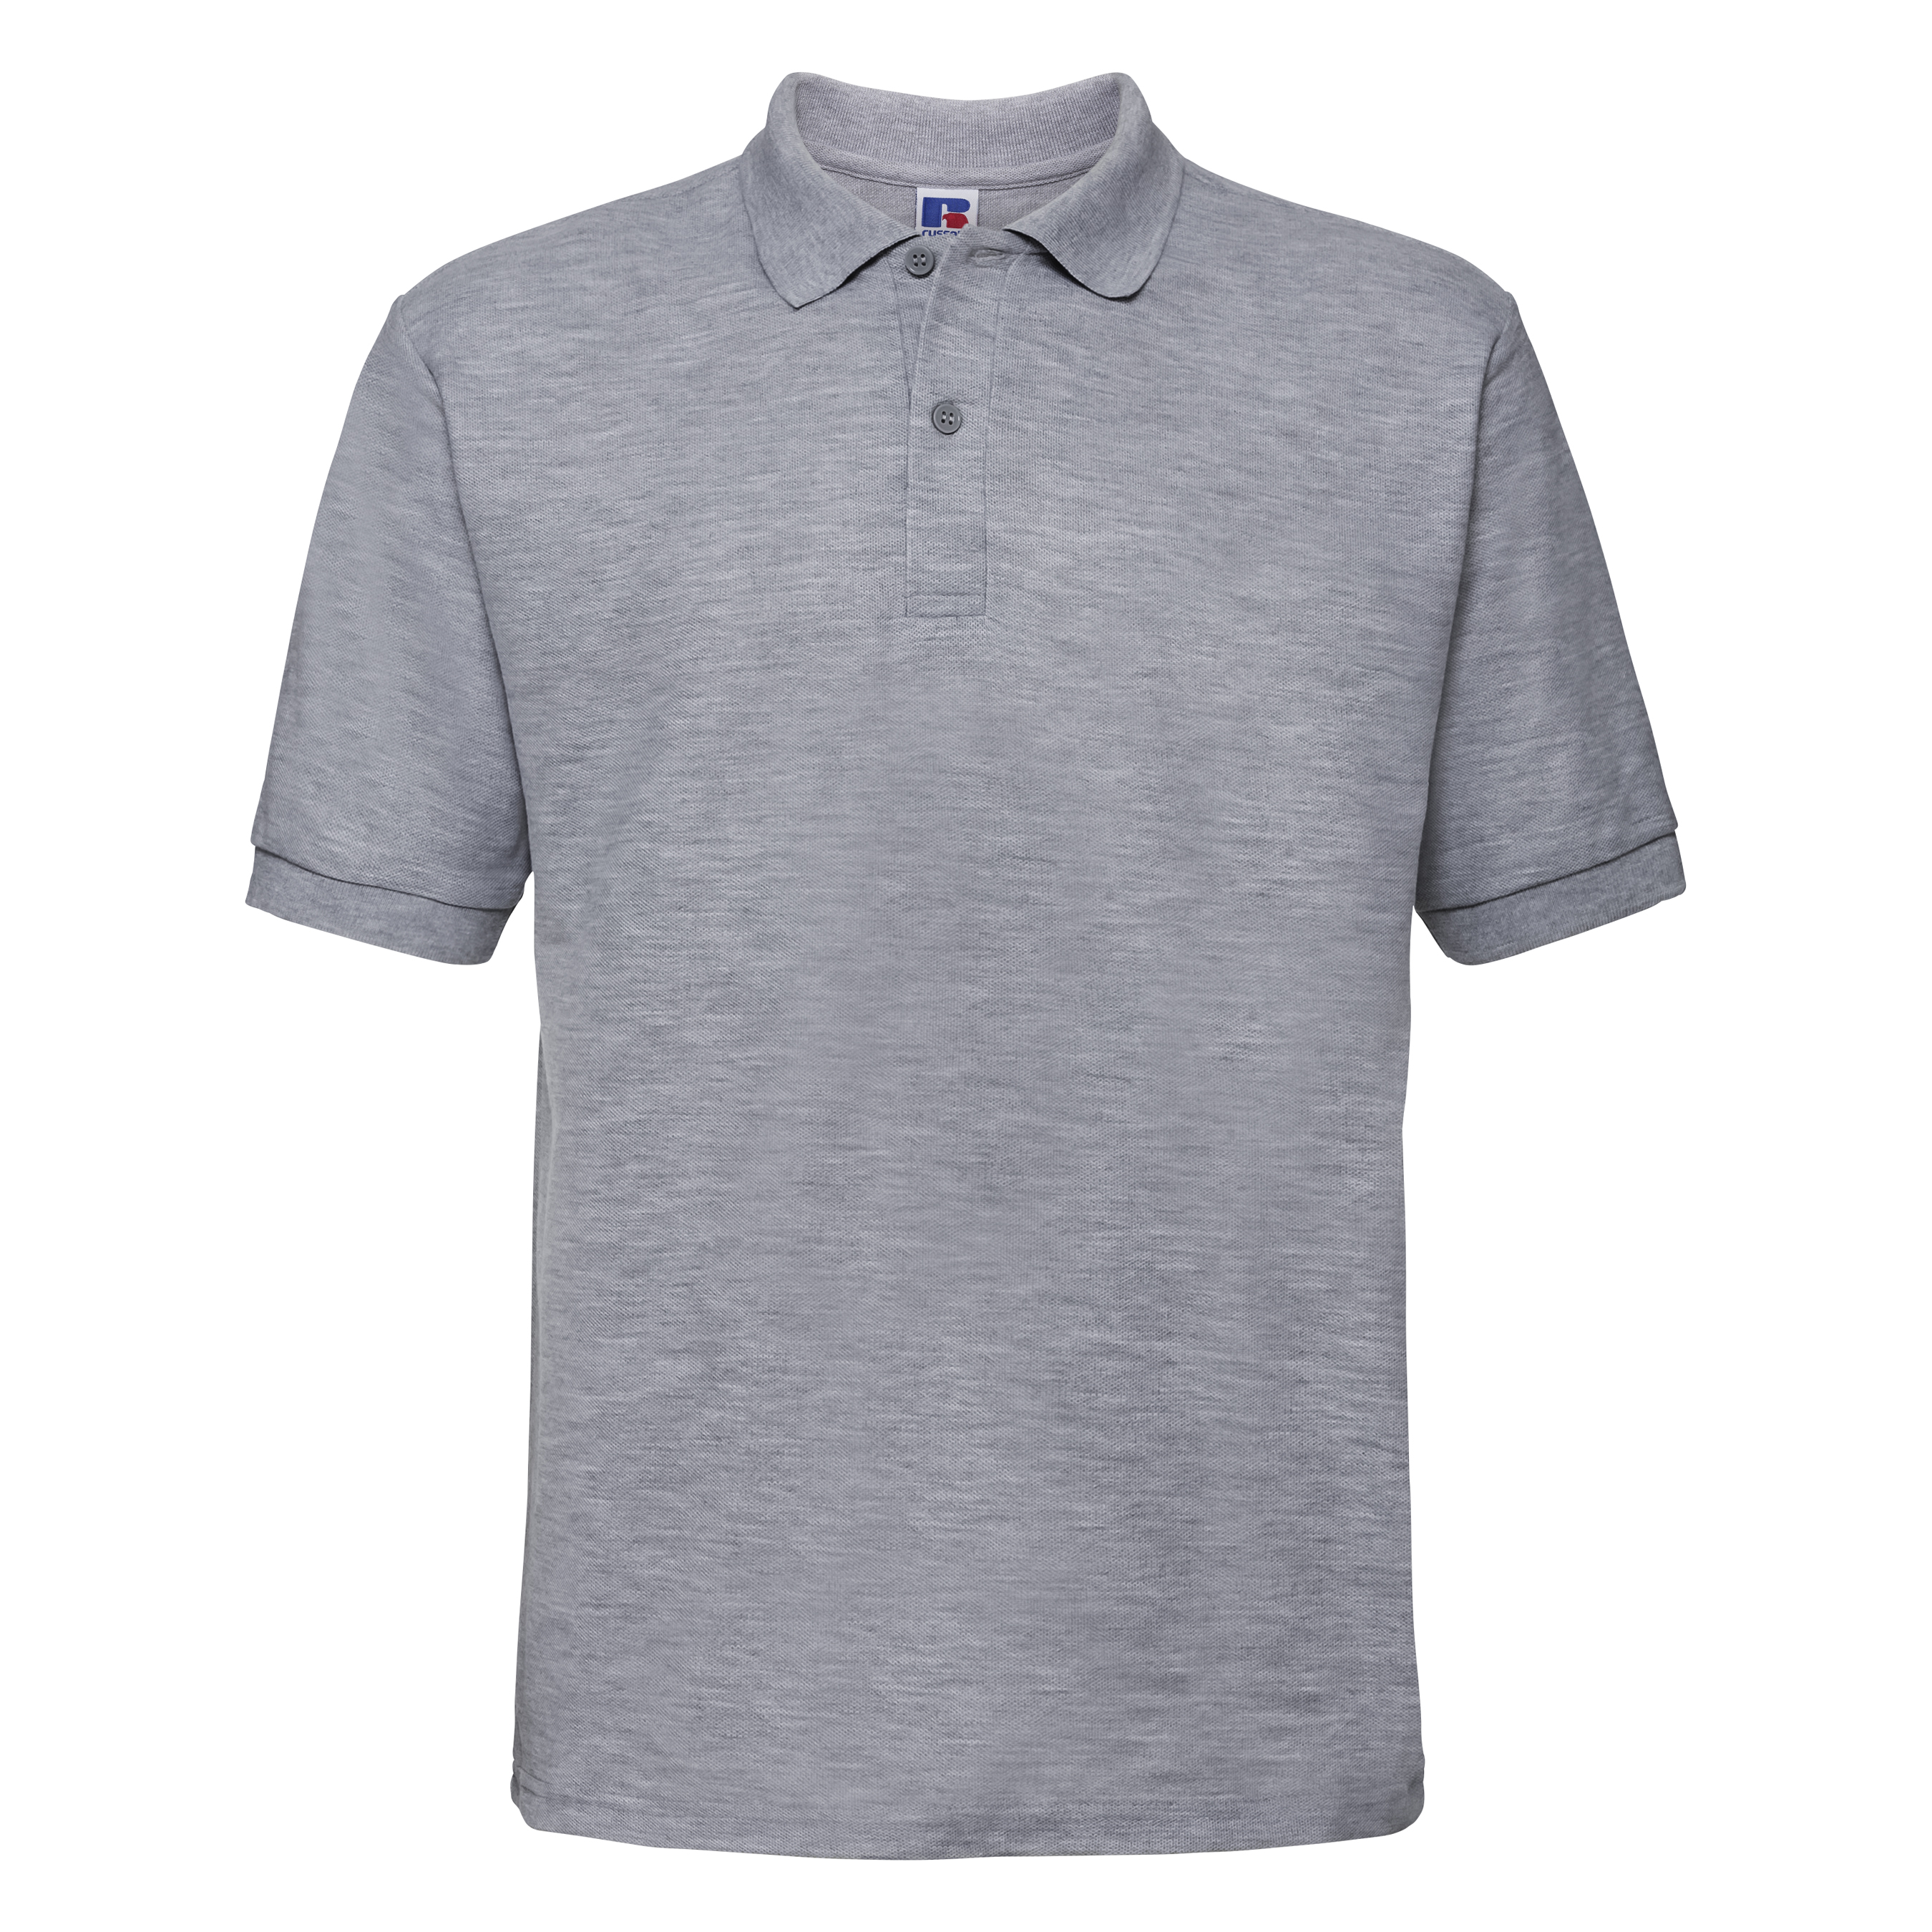 ax-httpswebsystems.s3.amazonaws.comtmp_for_downloadrussell-classic-polycotton-polo-light-oxford.jpg